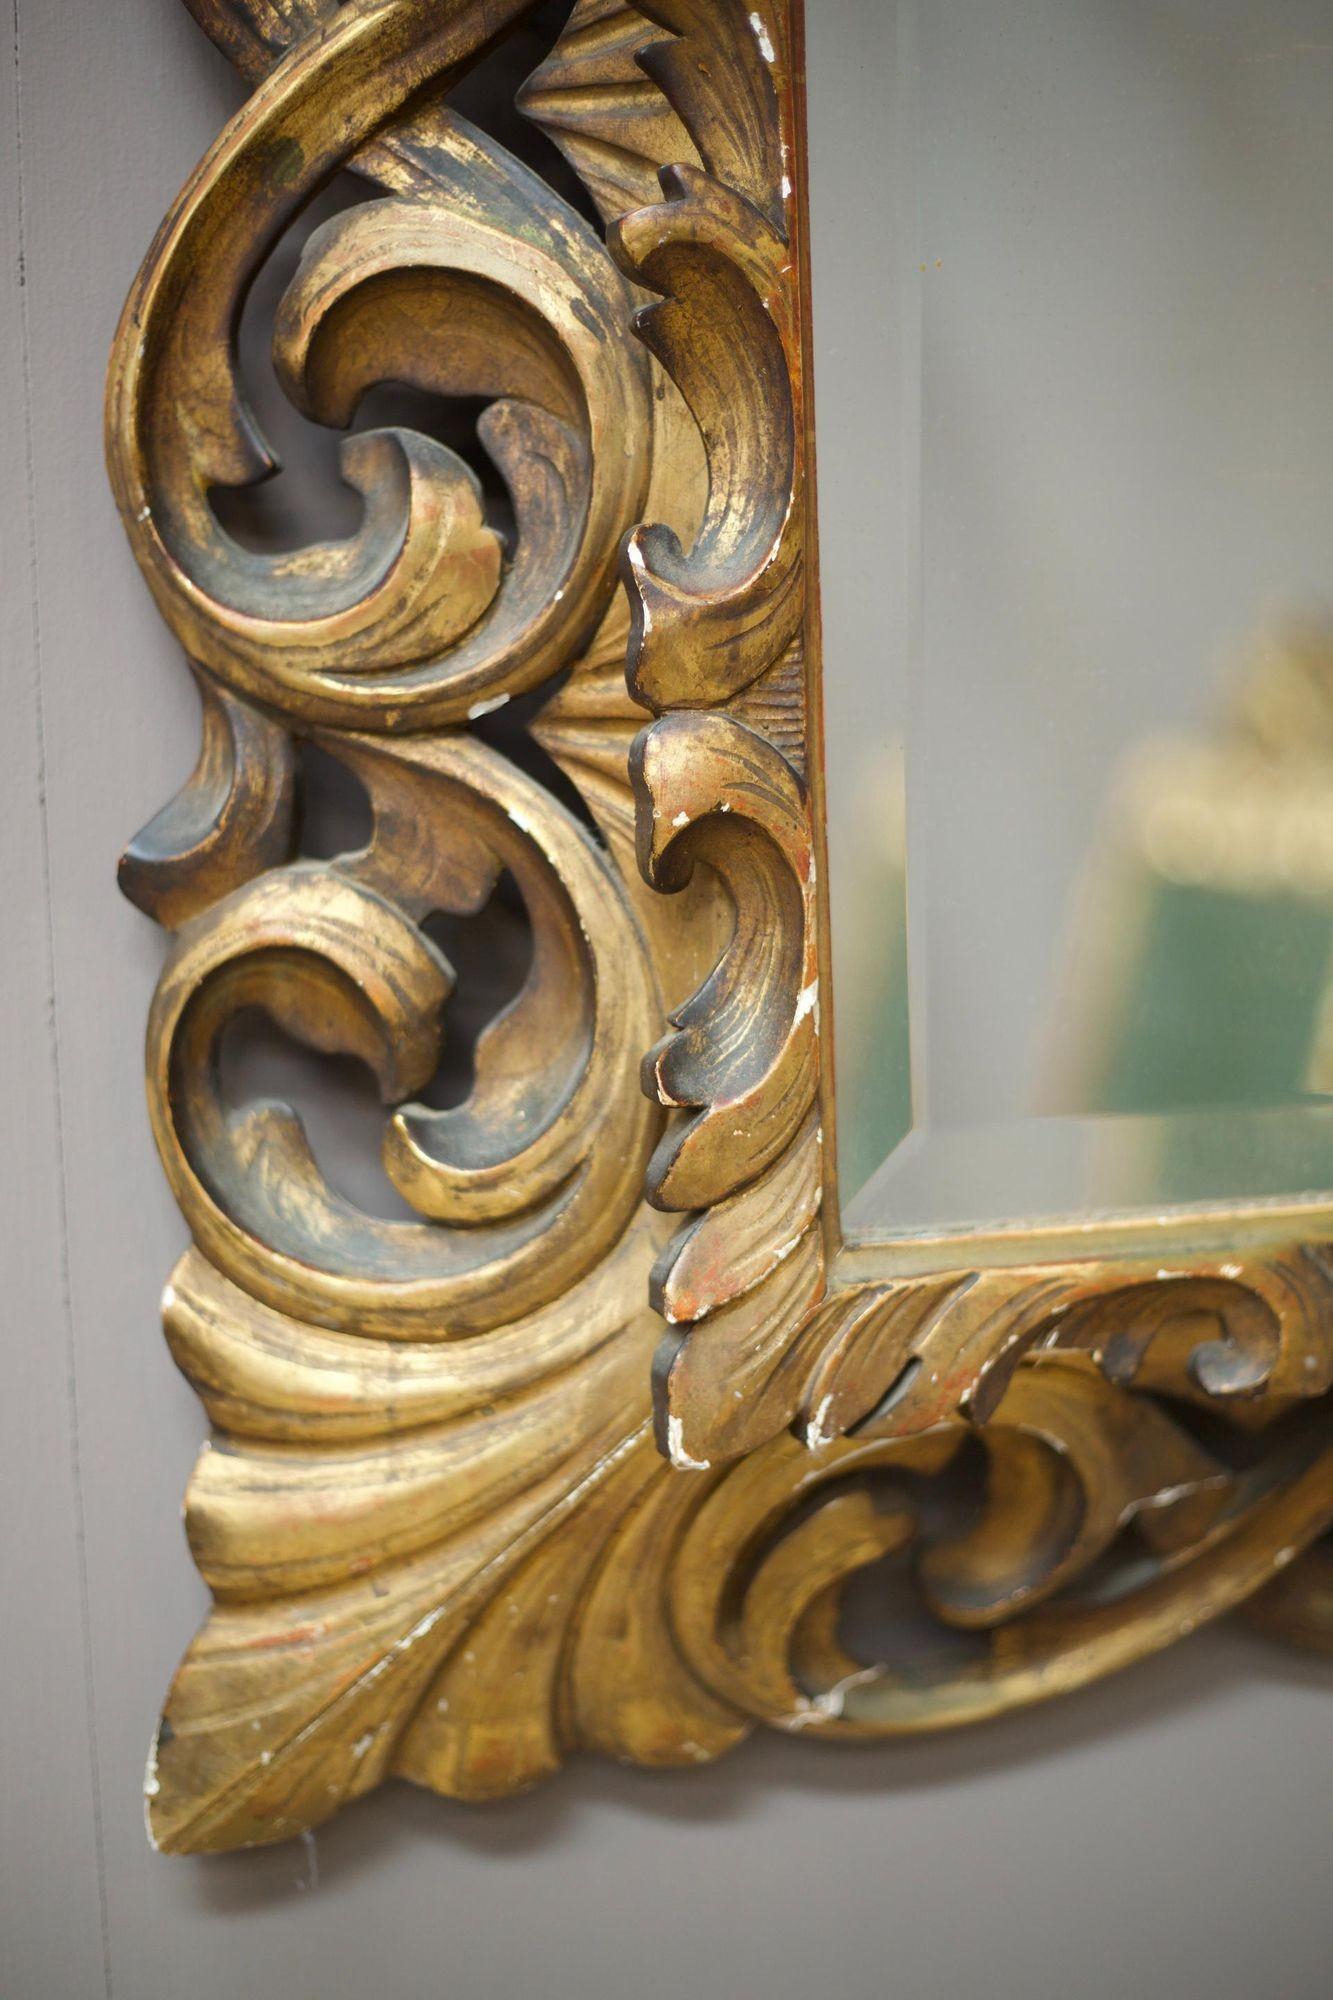 This is an exceptional early 19th century Italian Giltwood mirror in very good overall condition considering its fragile nature. This mirror is an impressive size and has a very clean mirror plate which looks to be original. The gilt decoration has